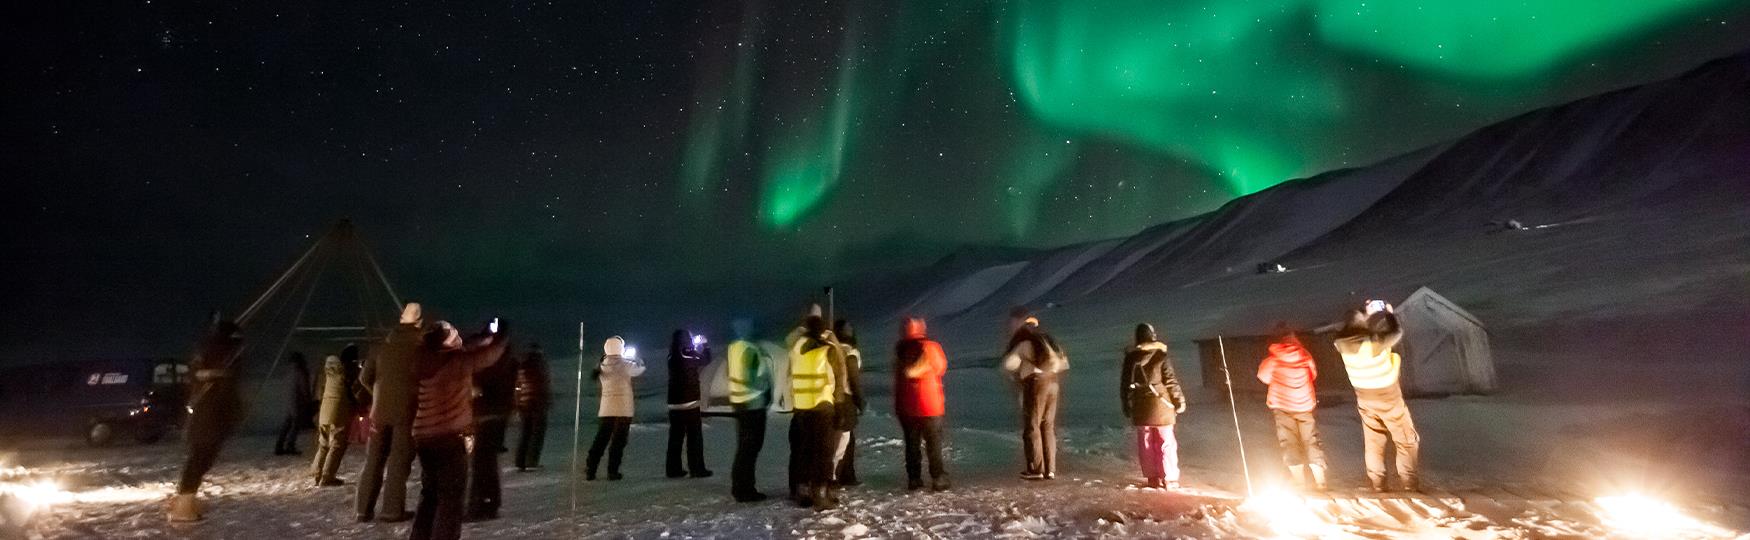 A group of guests looking up at norhtern lights in a dark sky